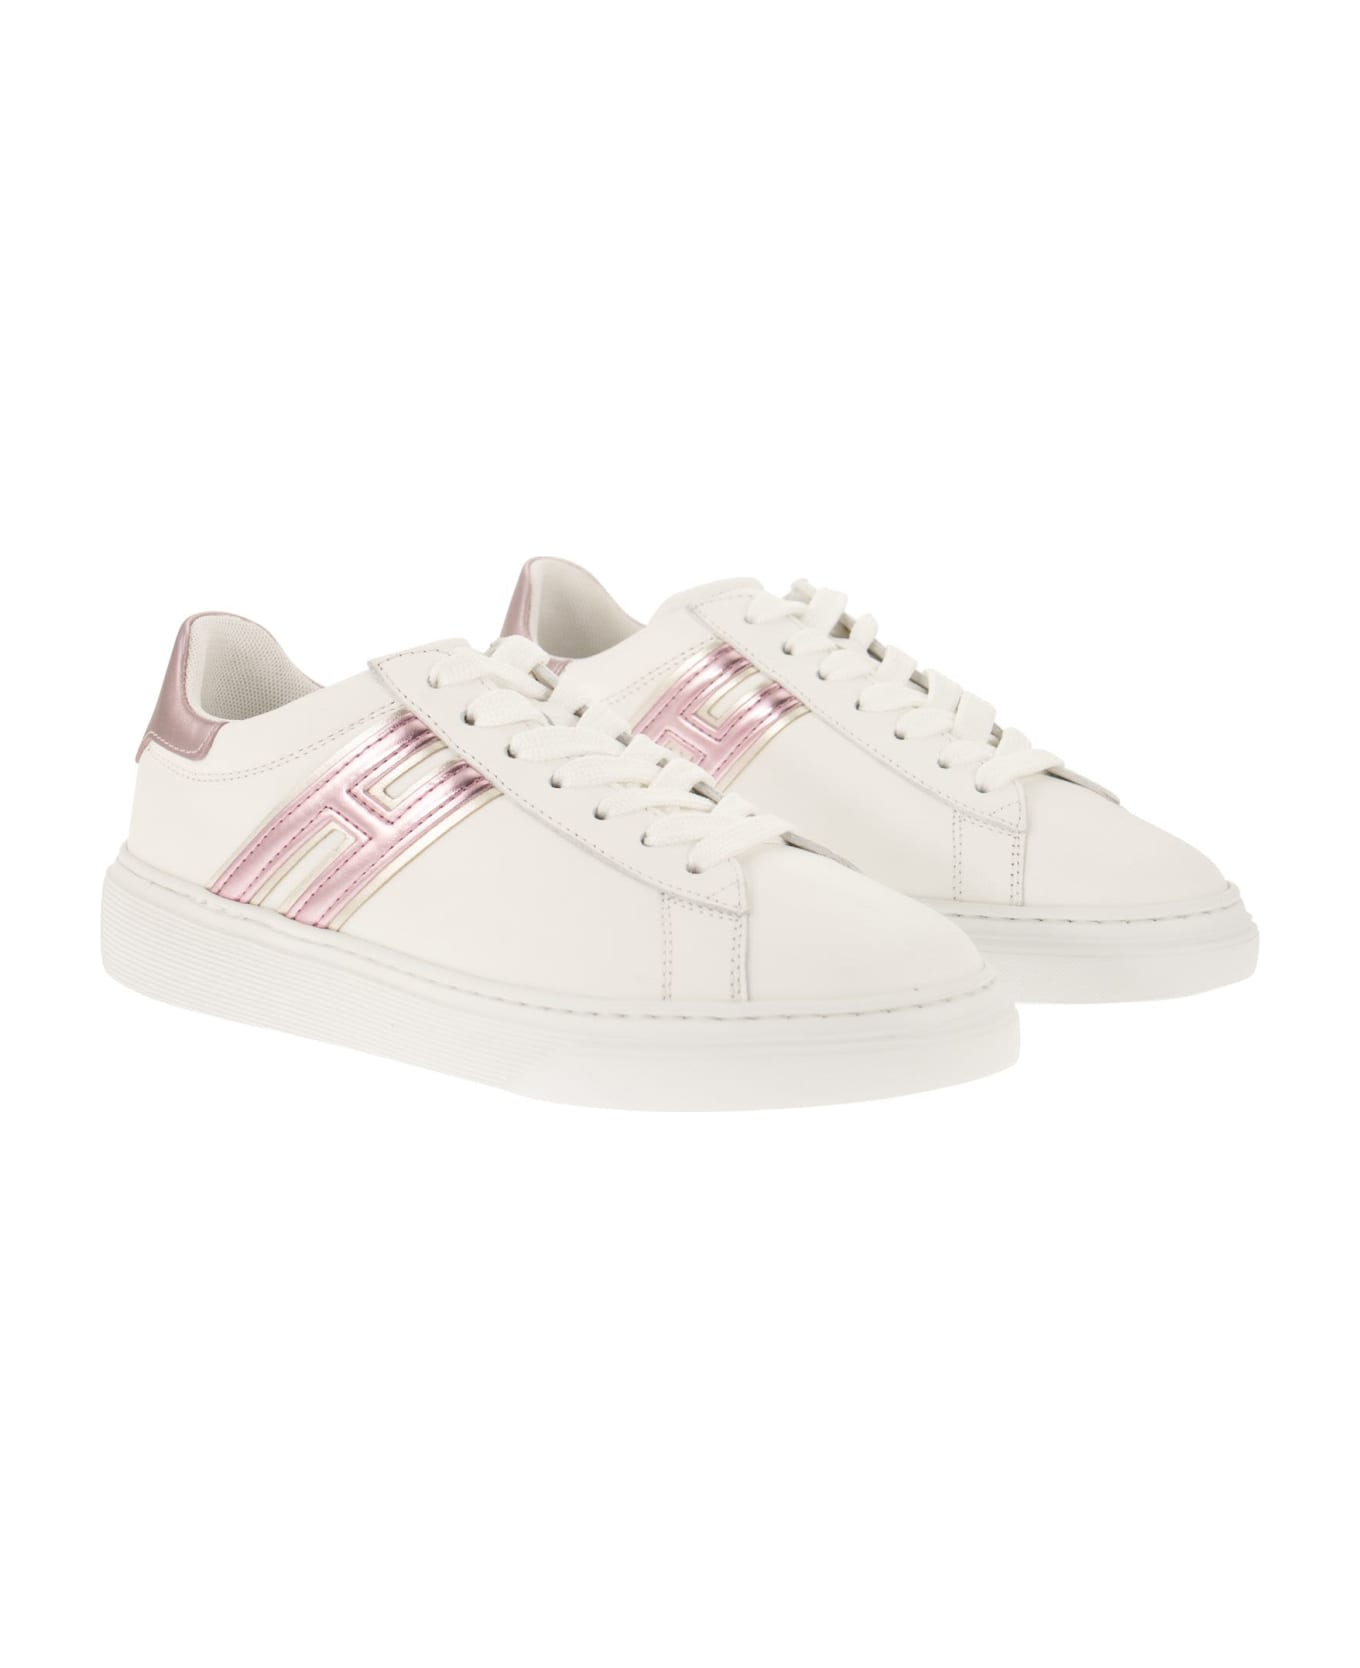 Hogan Sneakers "h365" In Leather - White/pink スニーカー